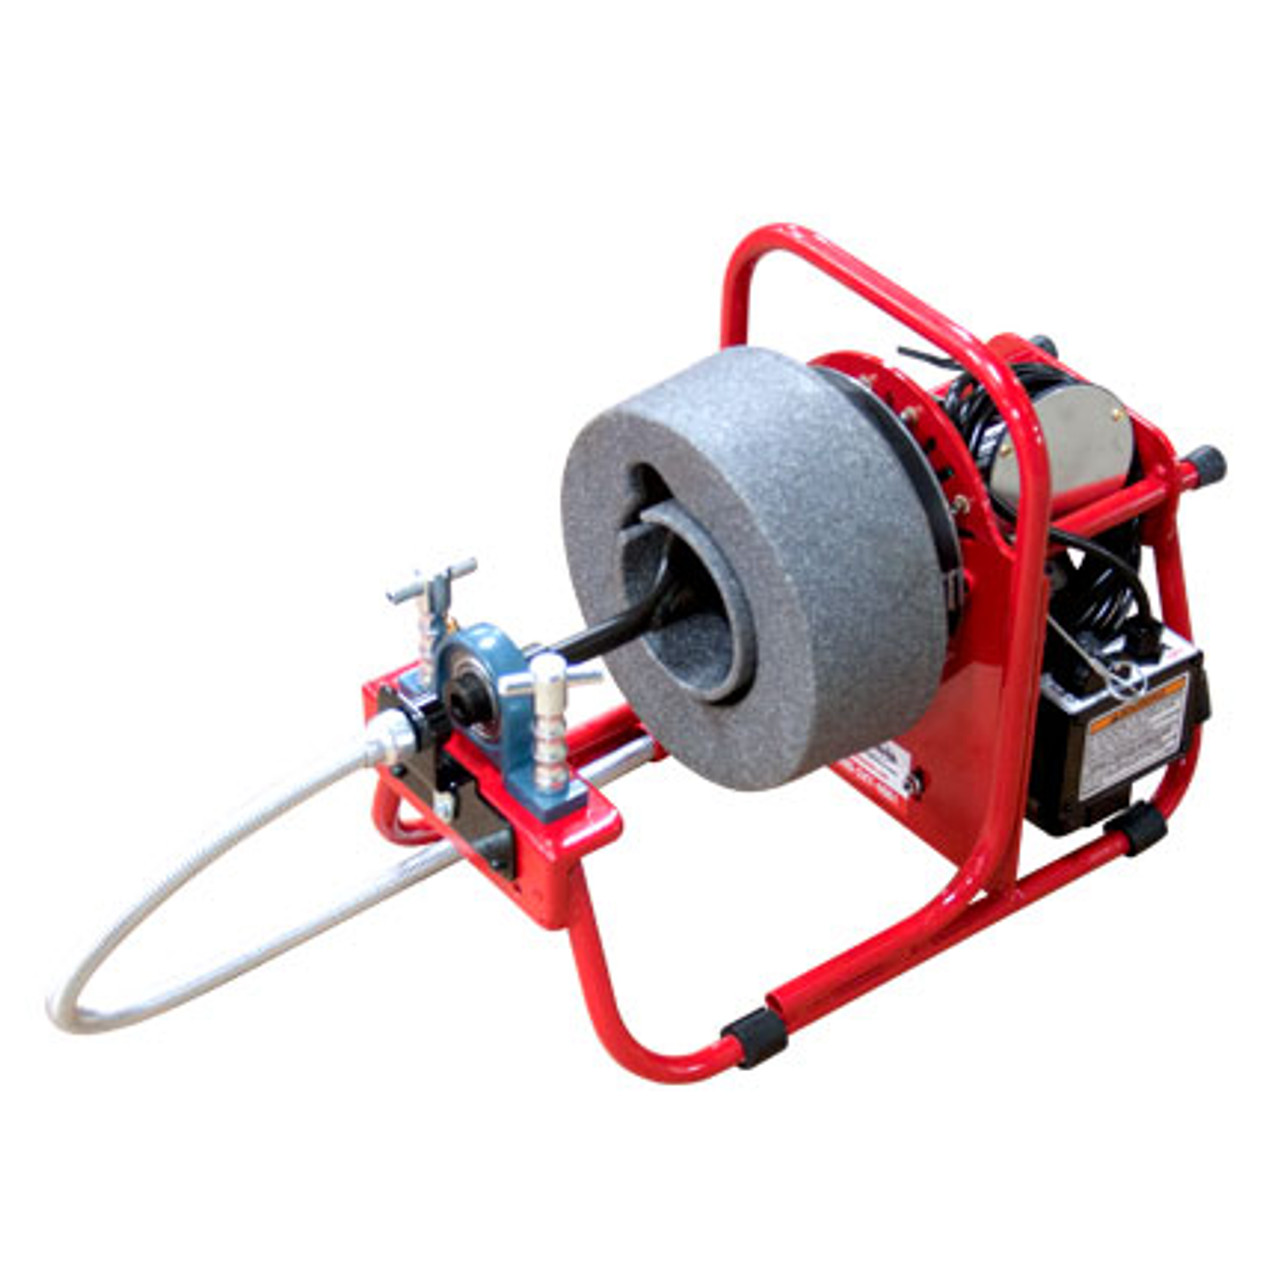 1/4 x 25' Drain Cleaning Machine Cable